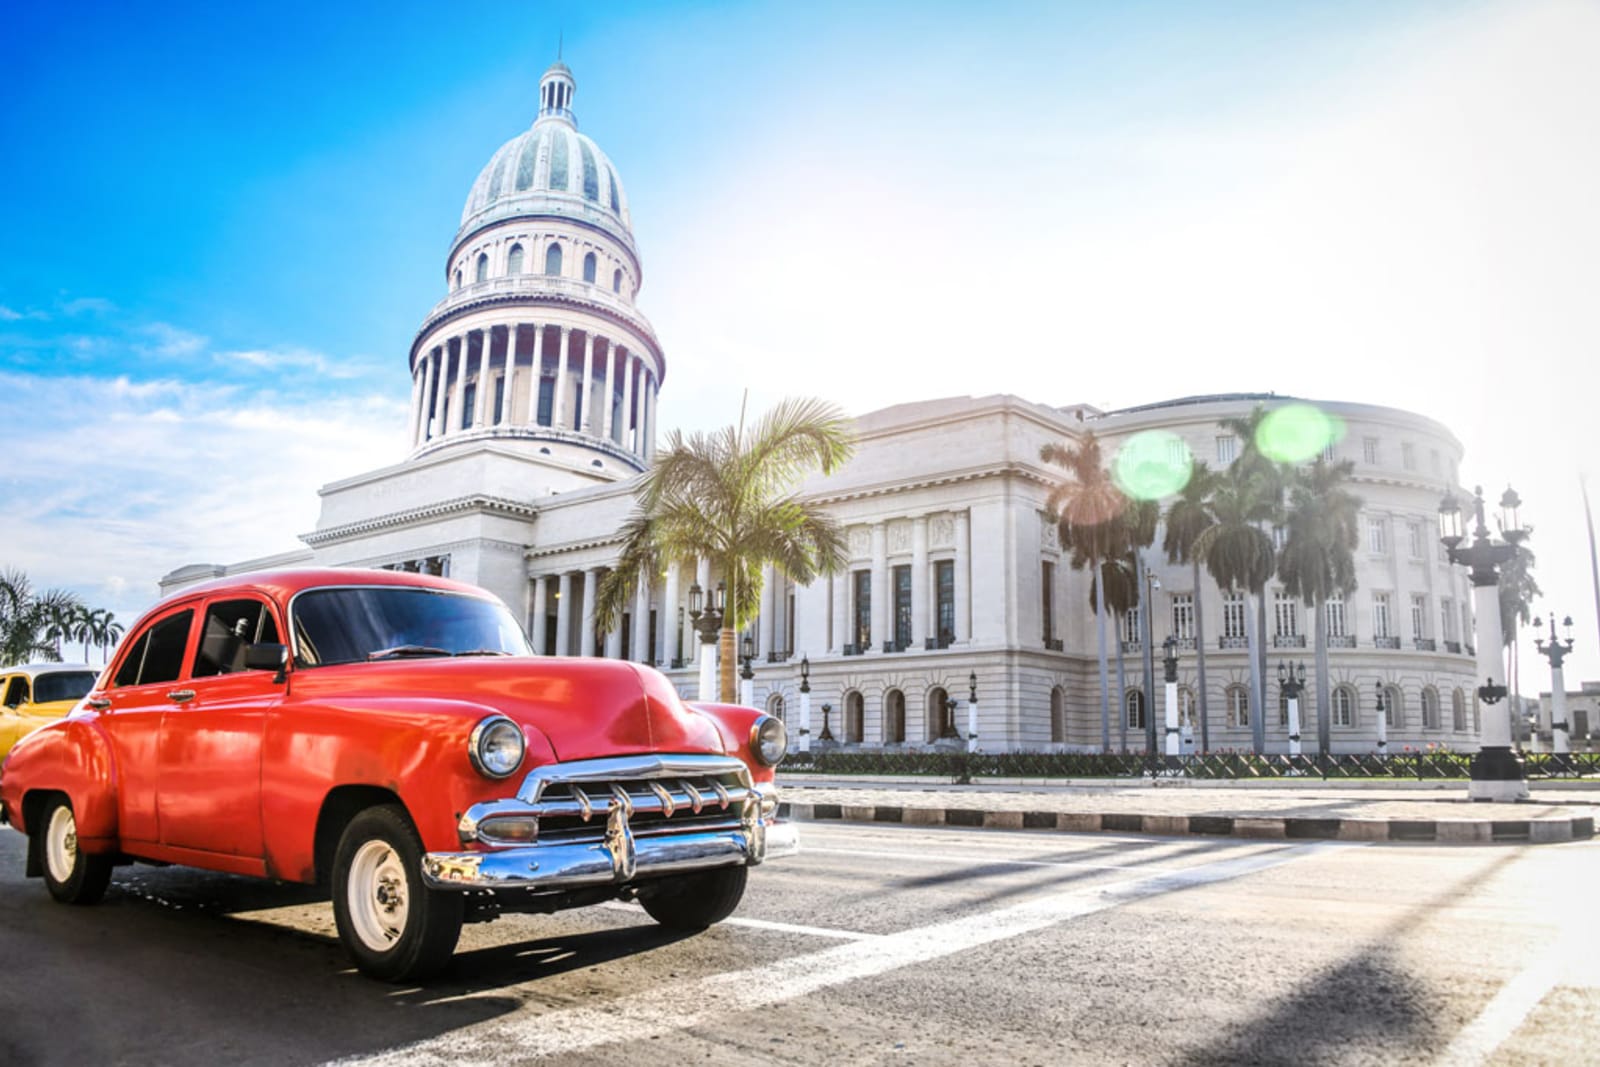 Red Authentic Vintage Car Moving In Front Of El Capitolio In Havana, Cuba